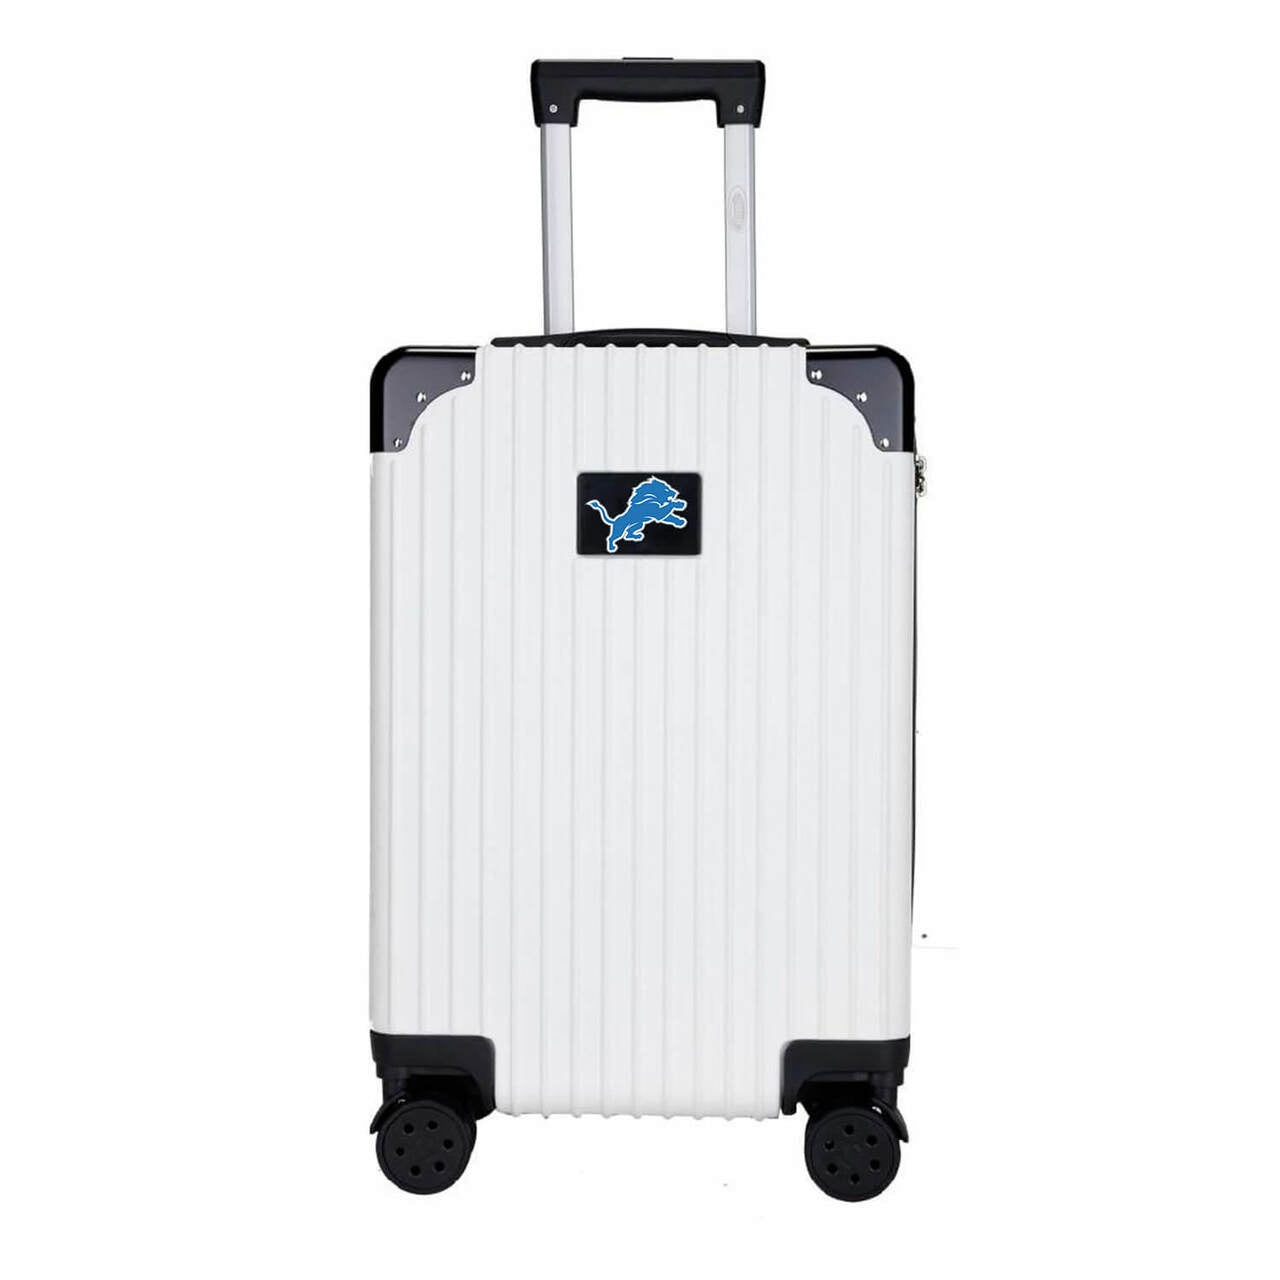 Detroit Lions Carry-On Hardcase Spinner Luggage